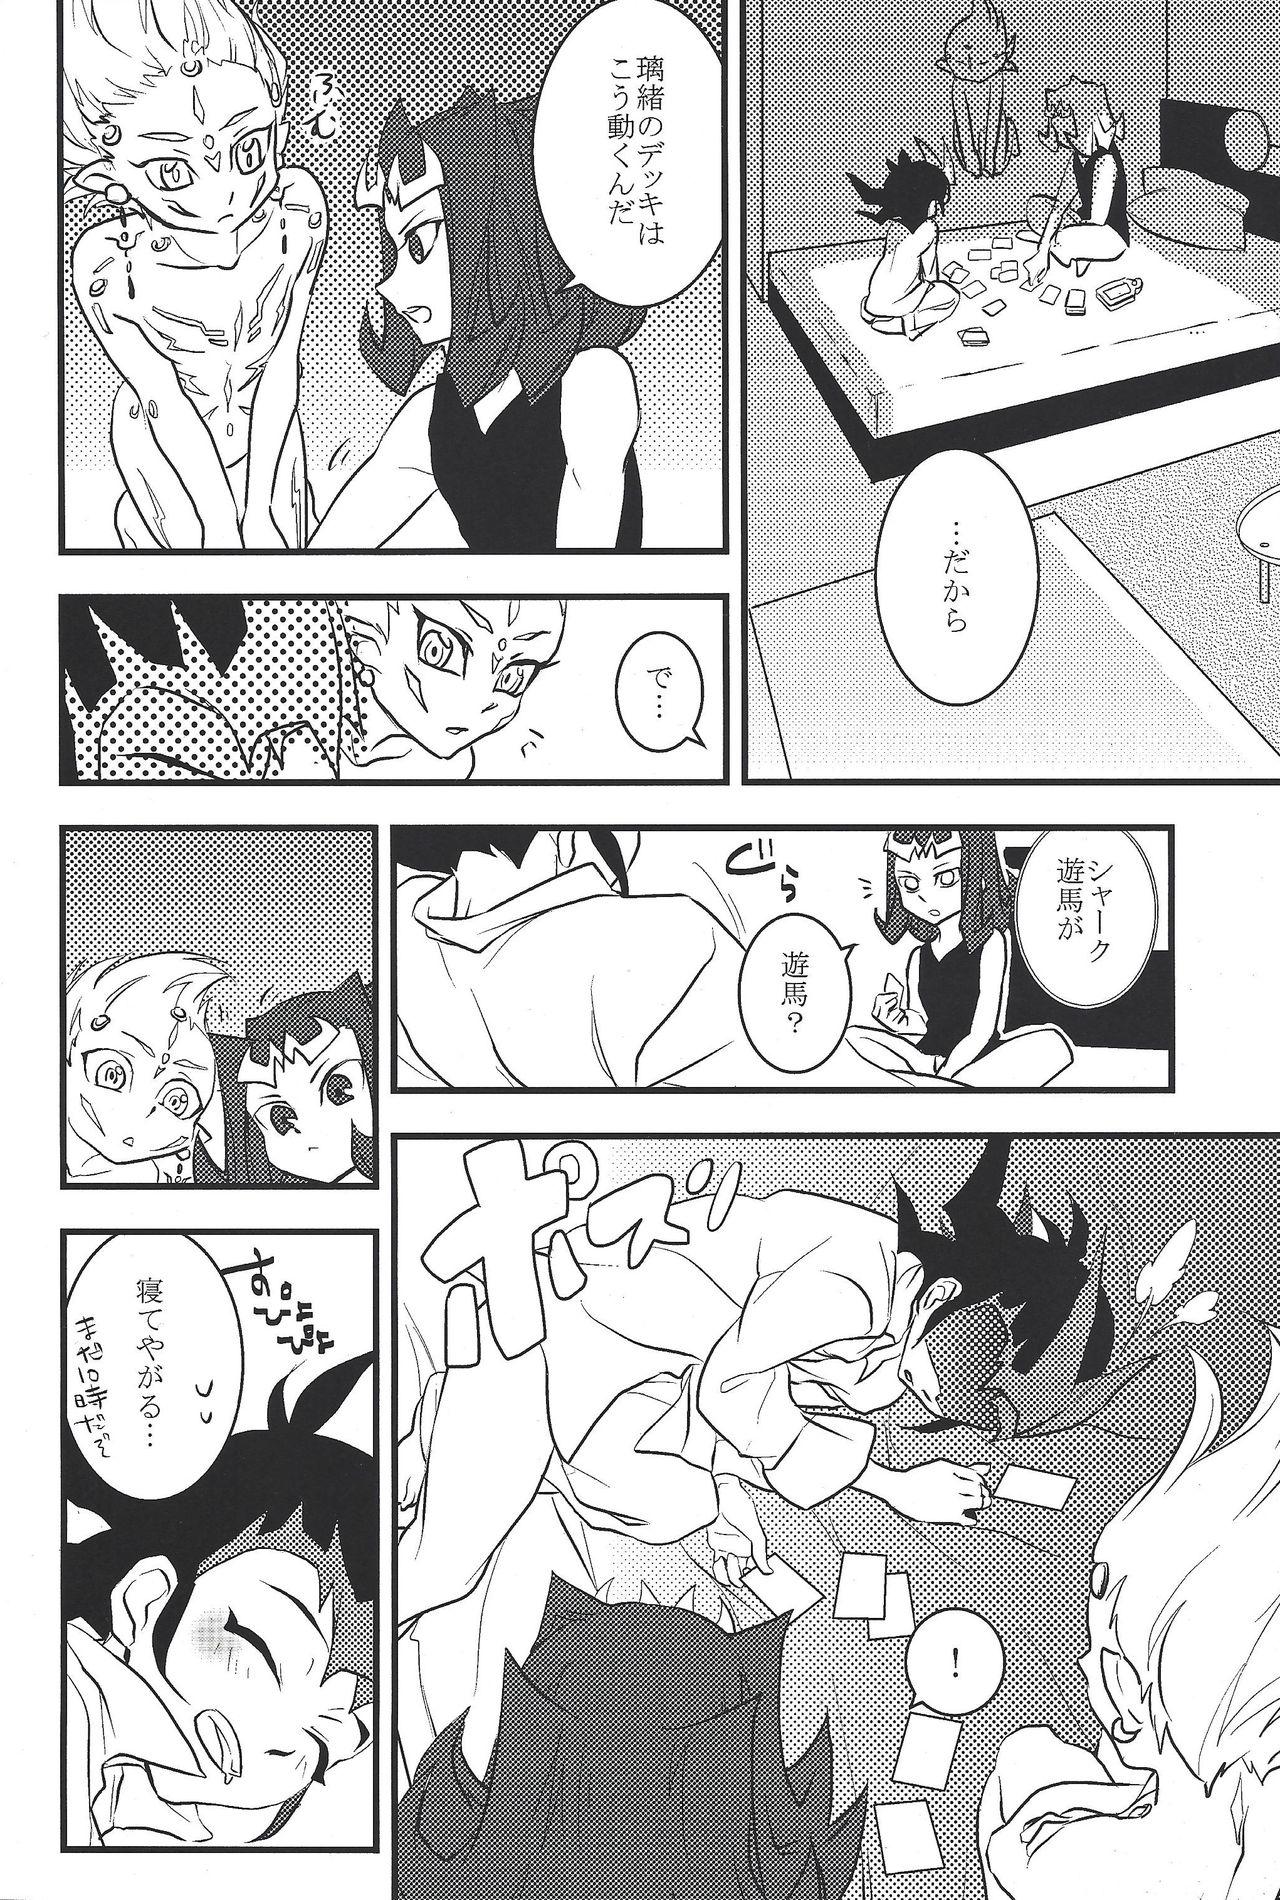 Spy Cam Suisei pure heart - Yu gi oh zexal Doggystyle Porn - Page 7